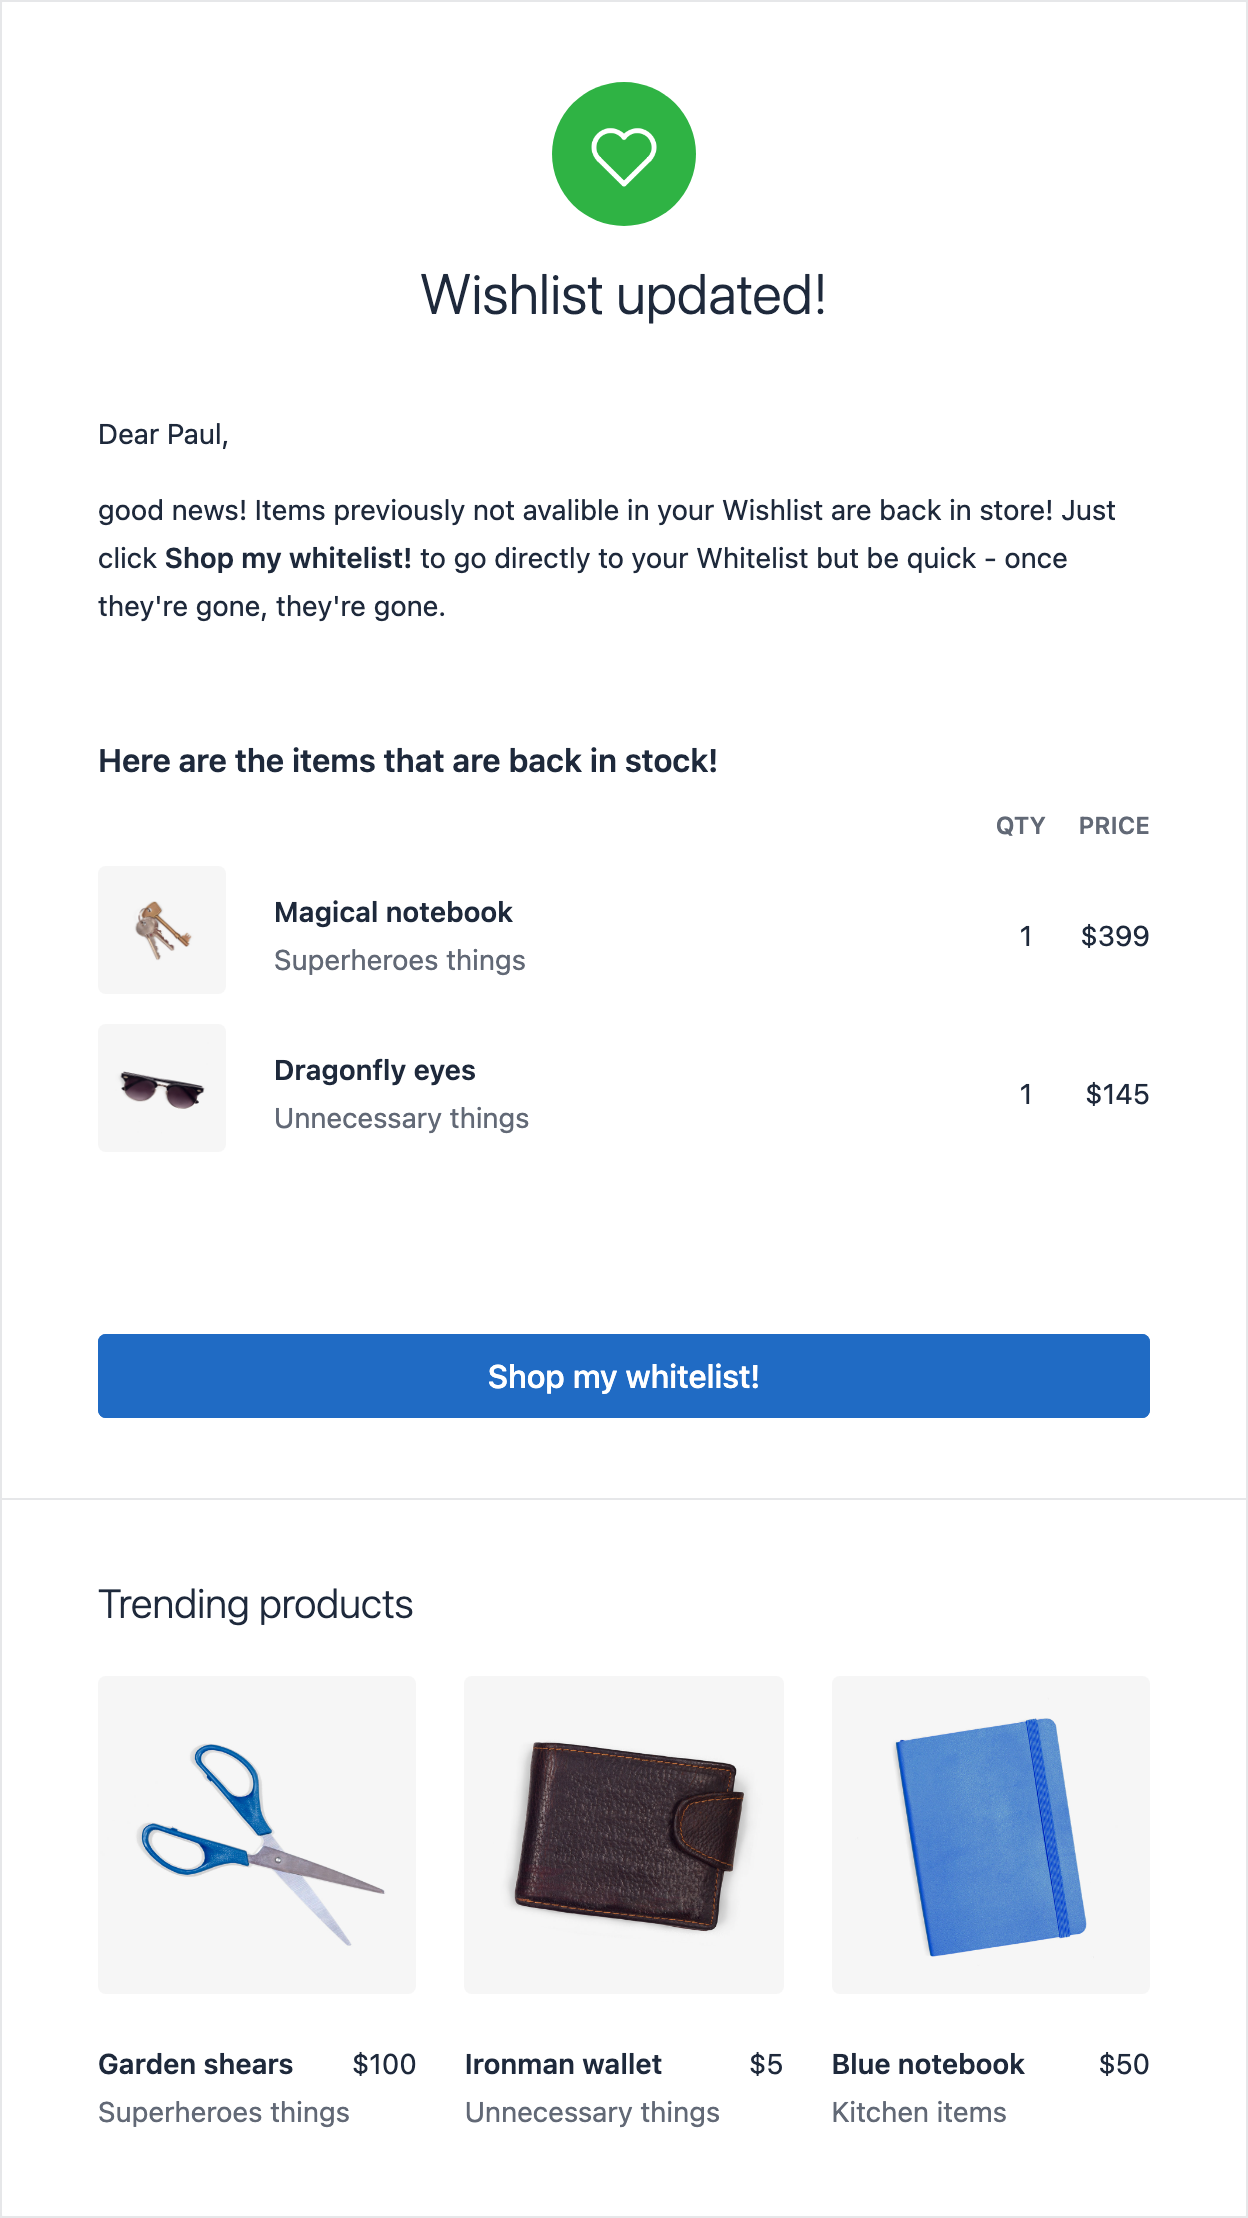 Email template with a wishlist update